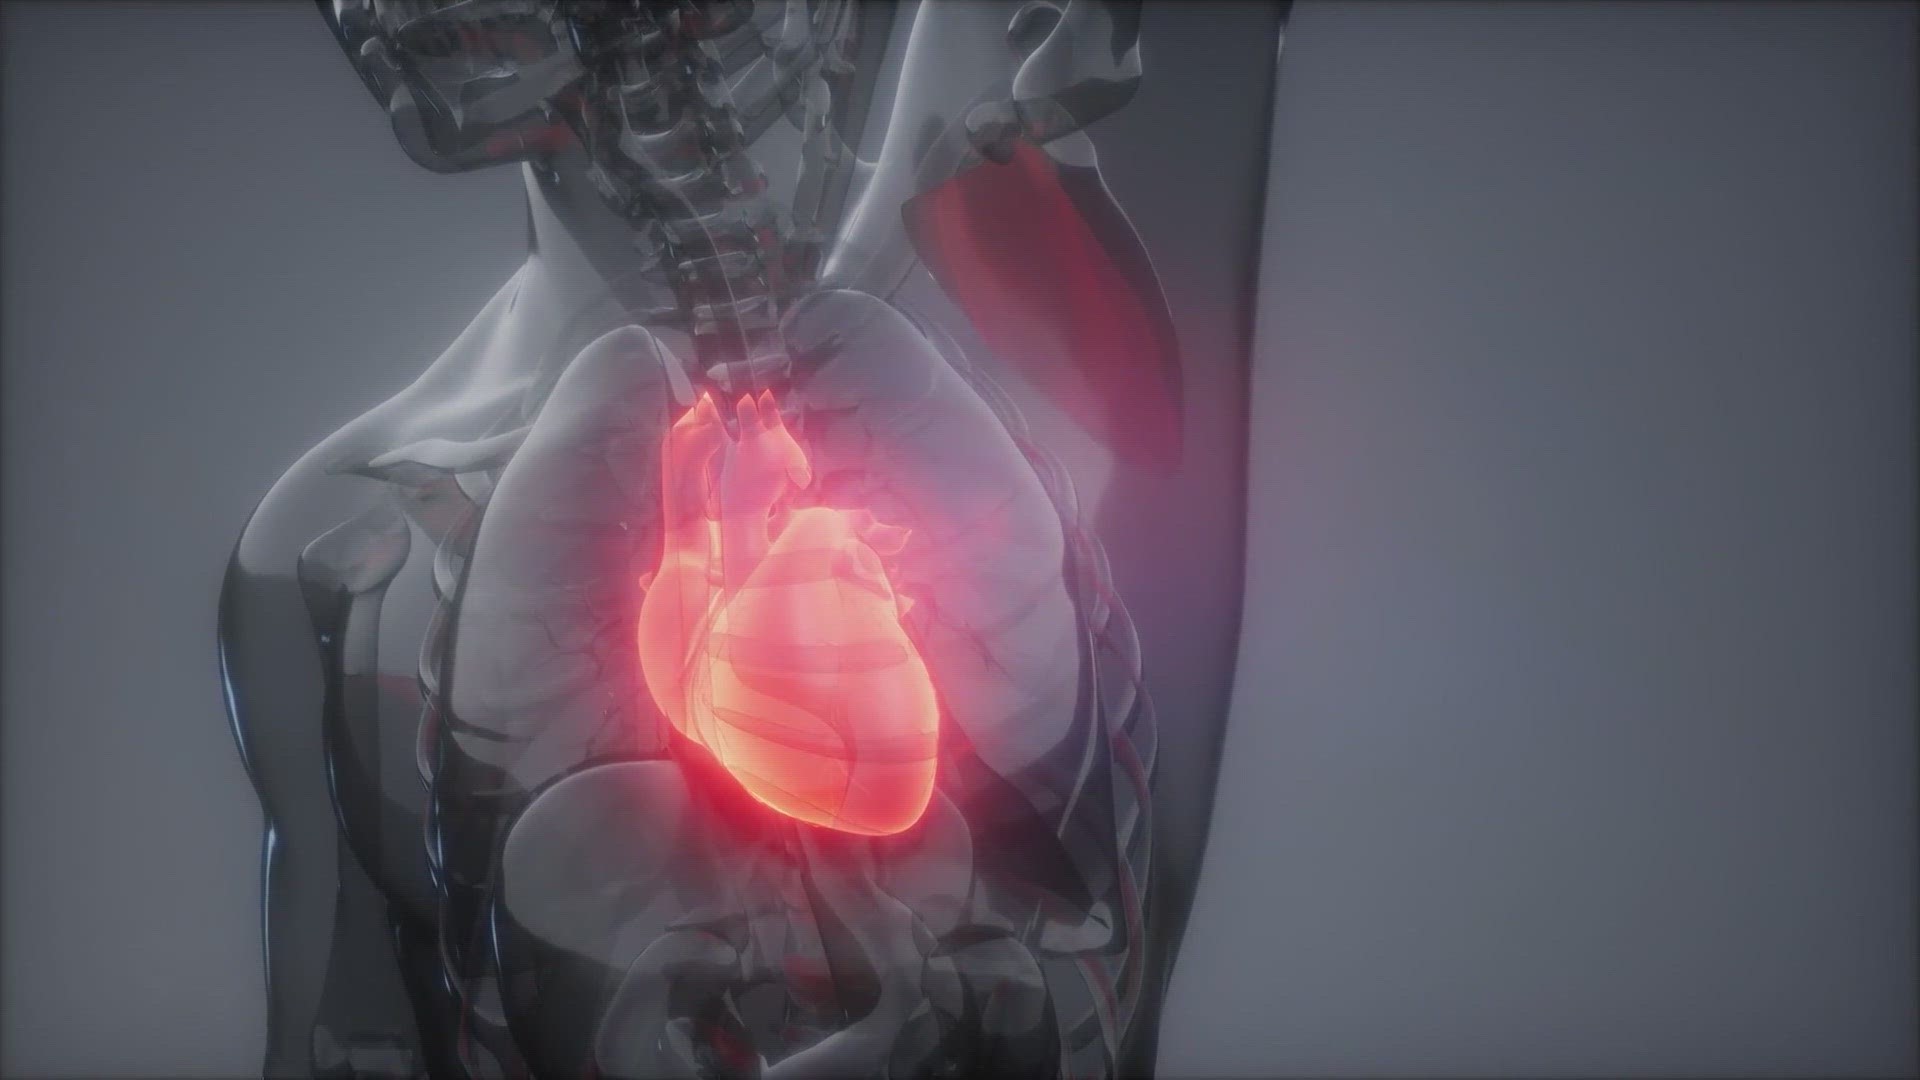 Heart attack numbers tick up heading into the holiday season. Here's what to watch out for.